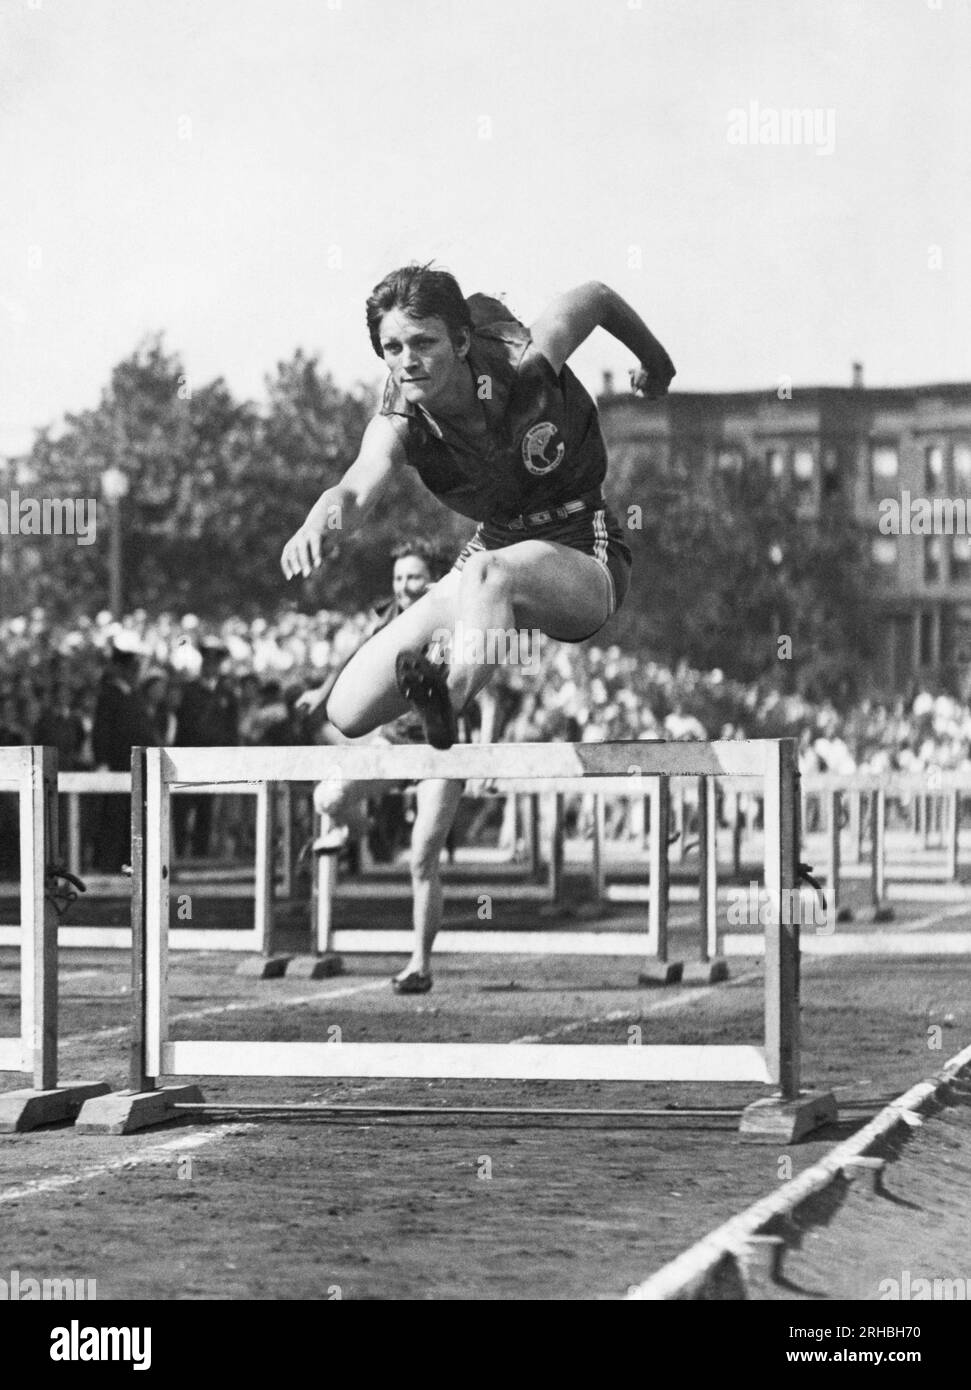 Jersey City, New Jersey:  July 25, 1931 Mildred 'Babe' Didrikson on her way to setting the women's world's record in the 80 meter high hurdles at the ninth annual AAU track and field championship. Stock Photo